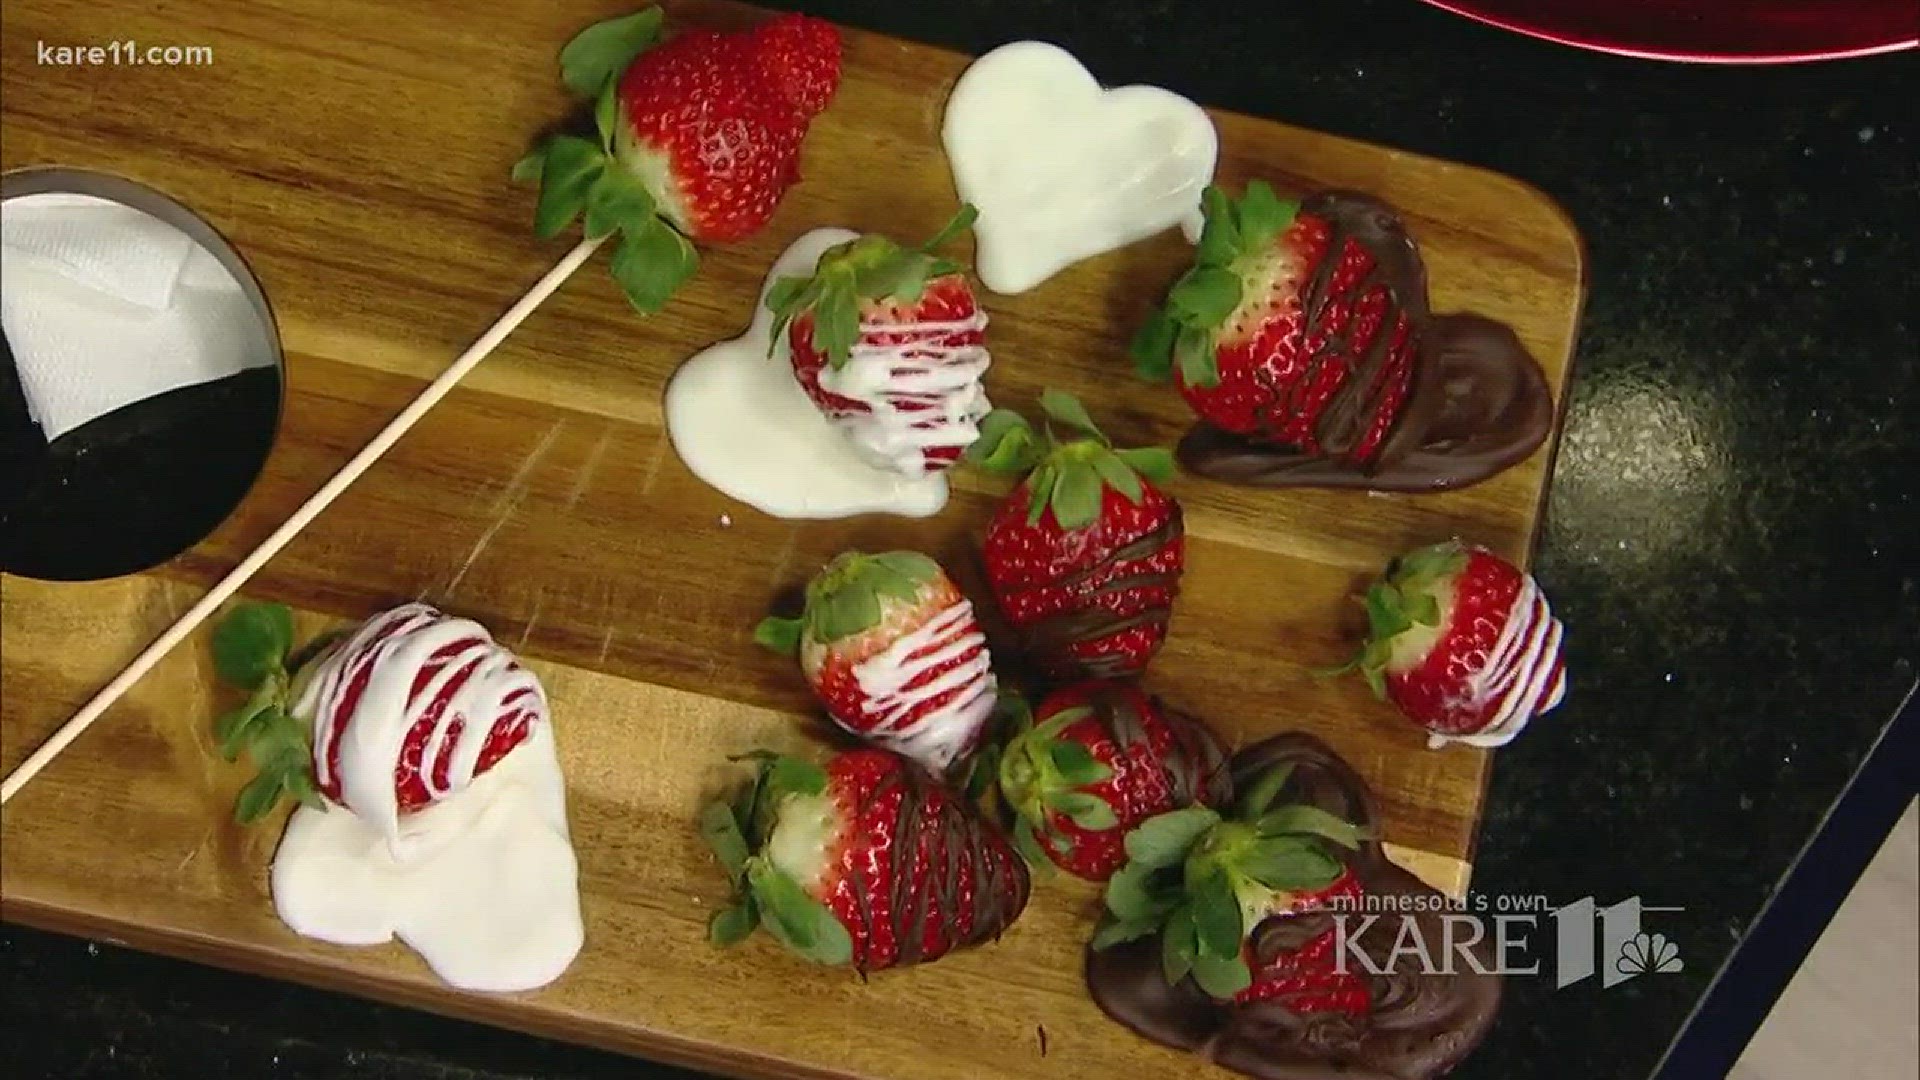 Chef Lisa O'Connell serves up her "cupid-approved" recipes guaranteed to win heart on Valentine's Day.